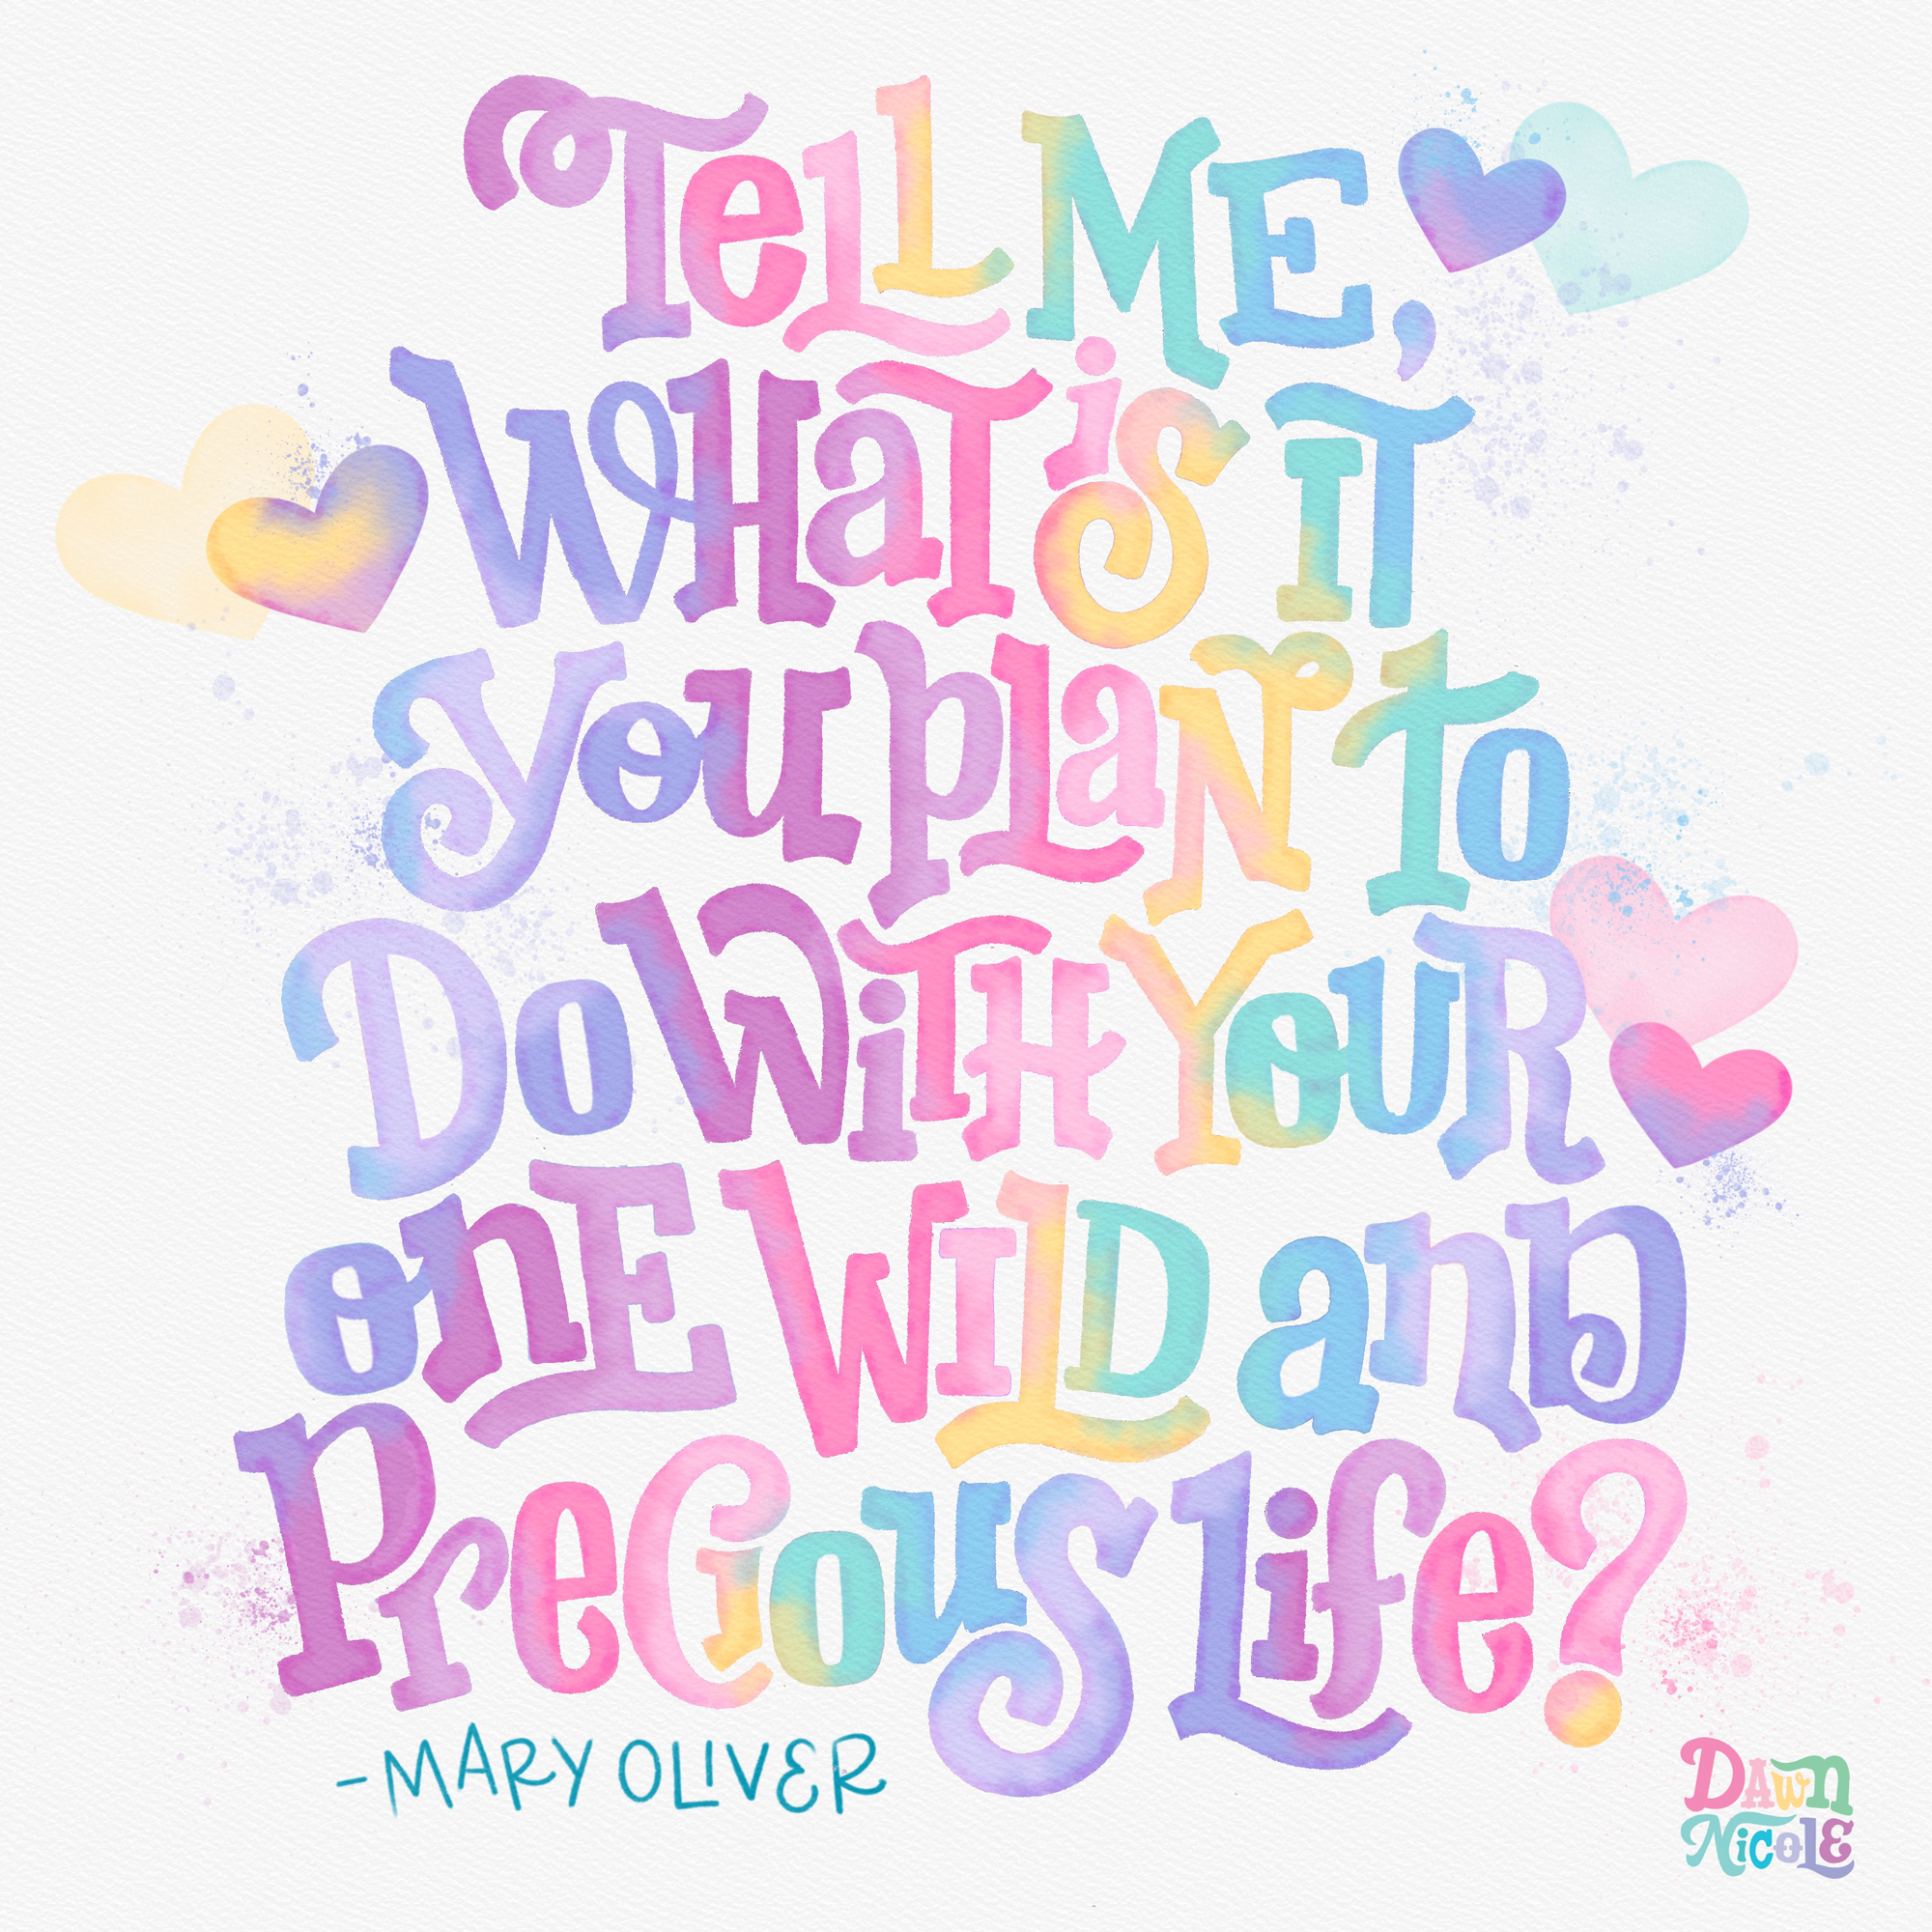 https://bydawnnicole.com/wp-content/uploads/2021/08/Watercolor-Lettering-Mary-Oliver.jpg